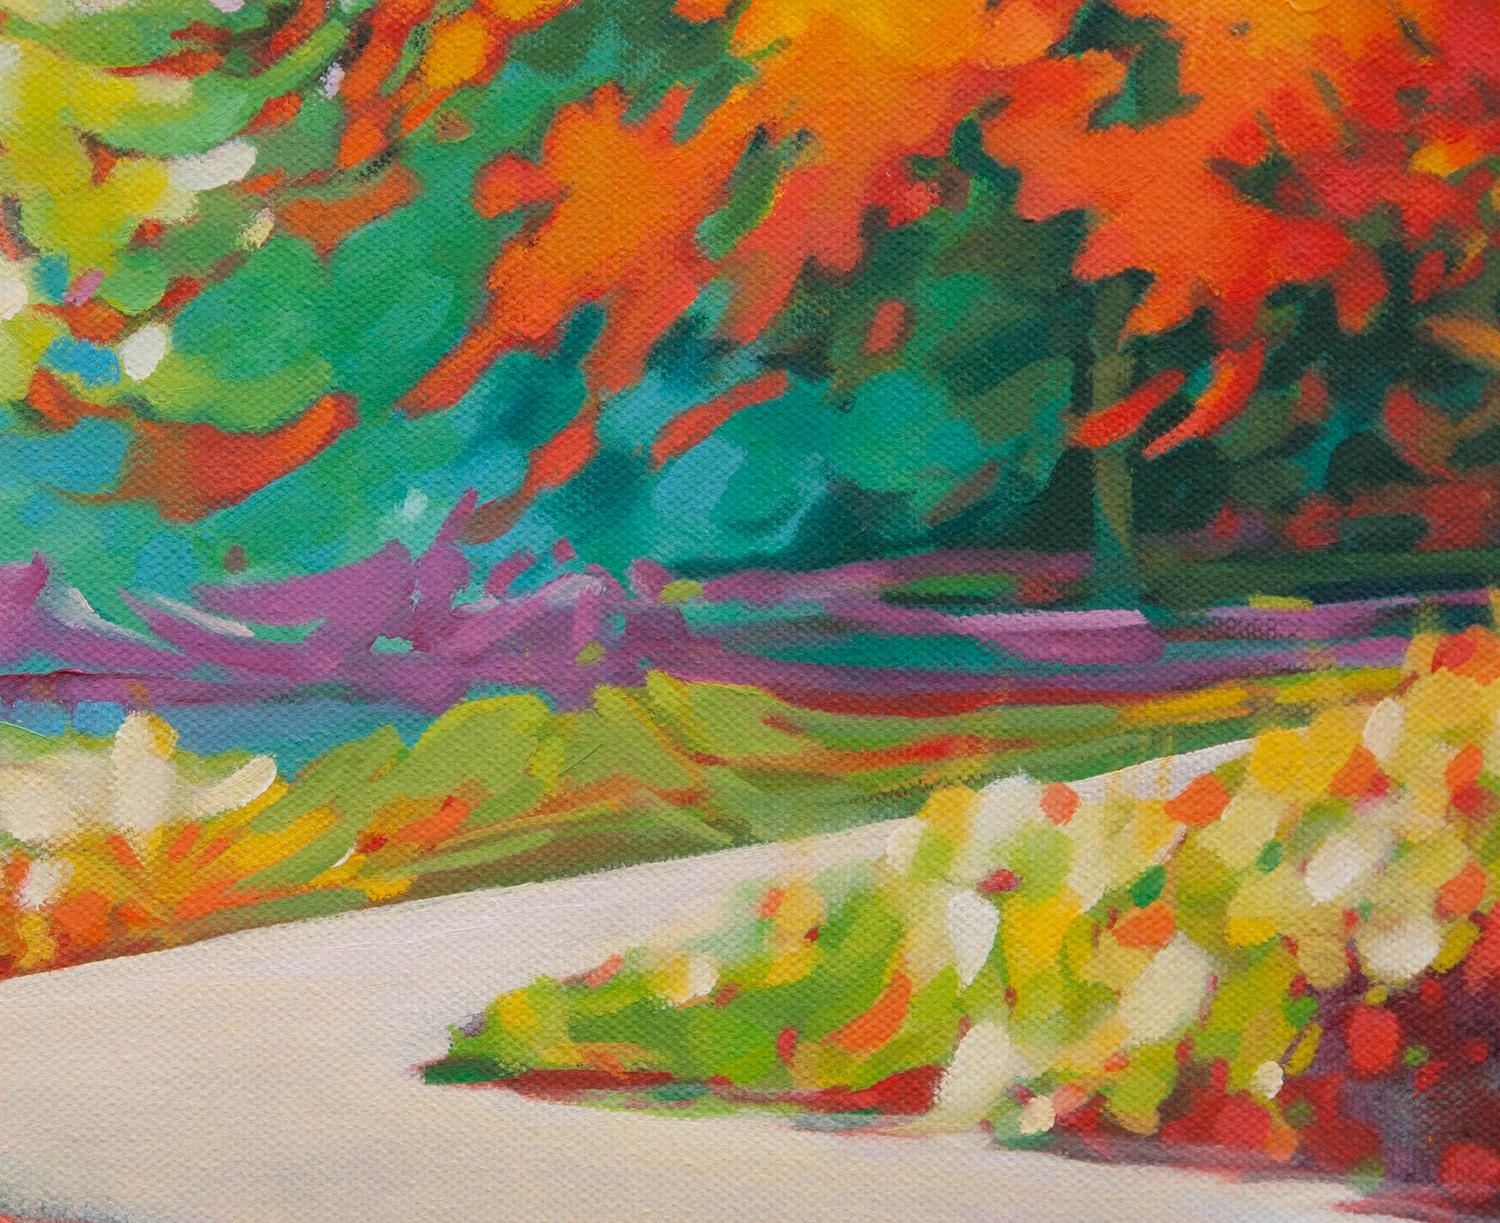 <p>Artist Comments<br />Part of David's current series capturing the beauty of Cincinnati public parks and the abundance of scenic locations. A welcoming path draws the viewer into the composition. Bright morning light illuminates the scene in a